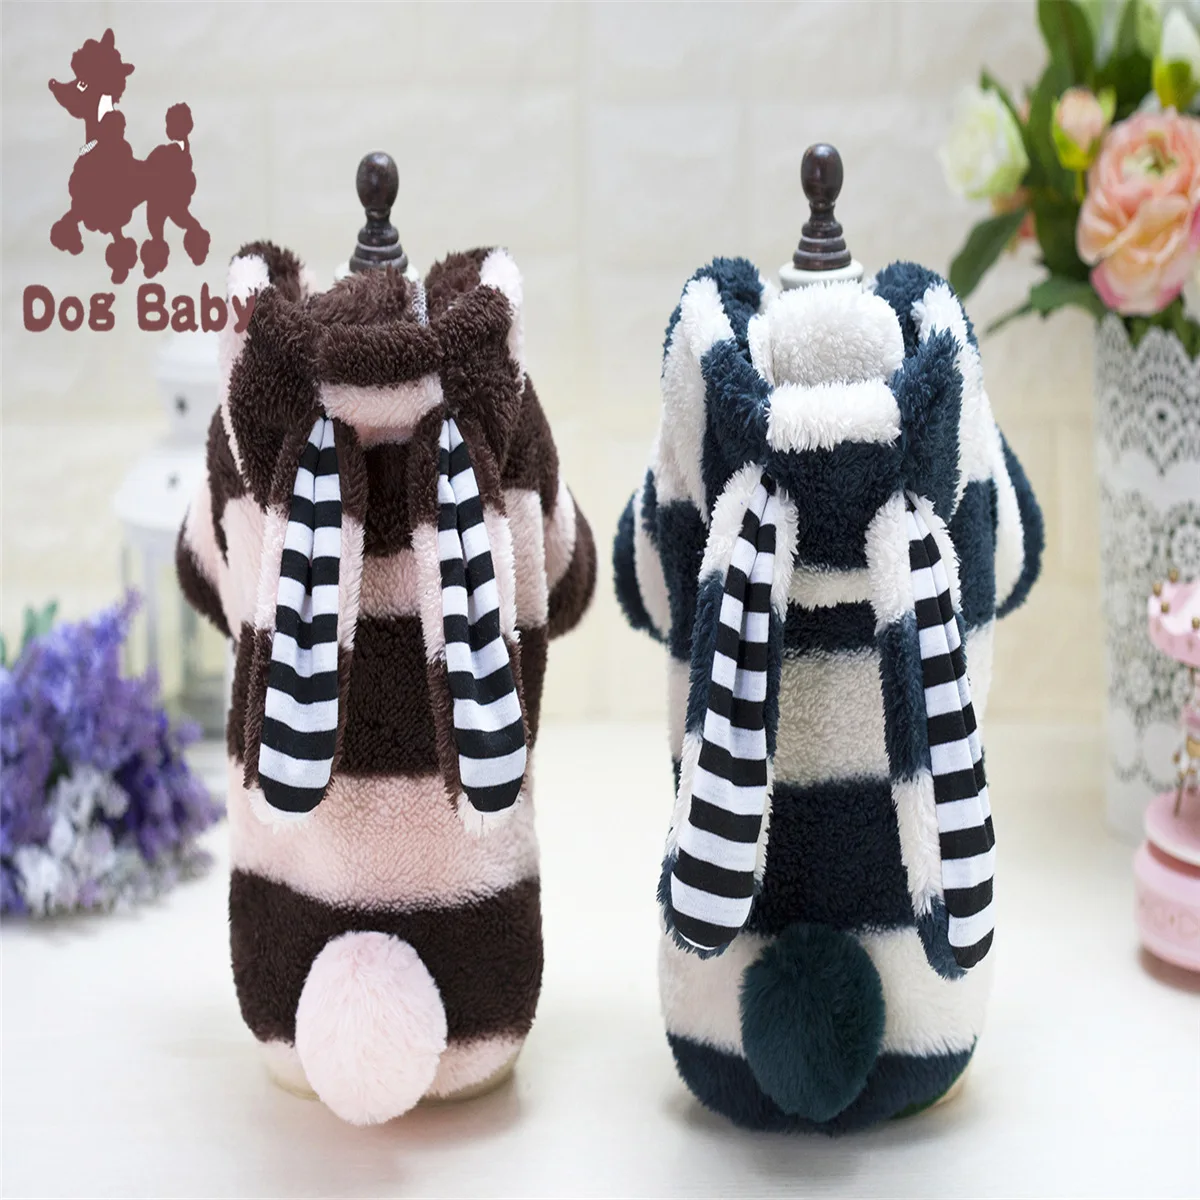 Pet Clothes Dog Big Ear Hooded Pomeranian Rabbit Ears Clothes Chihuahua Pajamas for Dogs Dog Costumes for Small Dogs